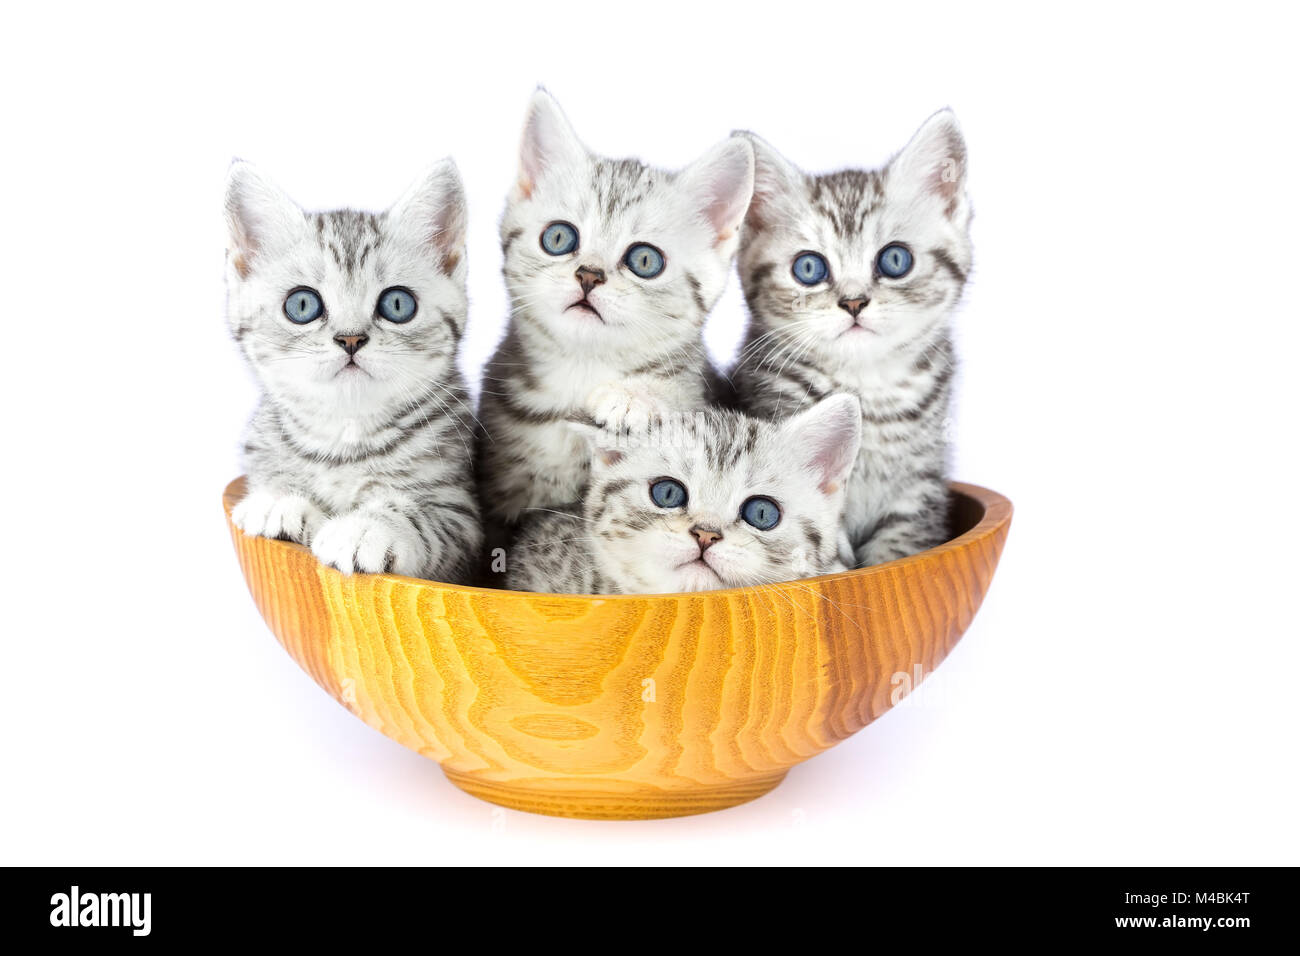 Four young cats sitting in wooden bowl on white Stock Photo